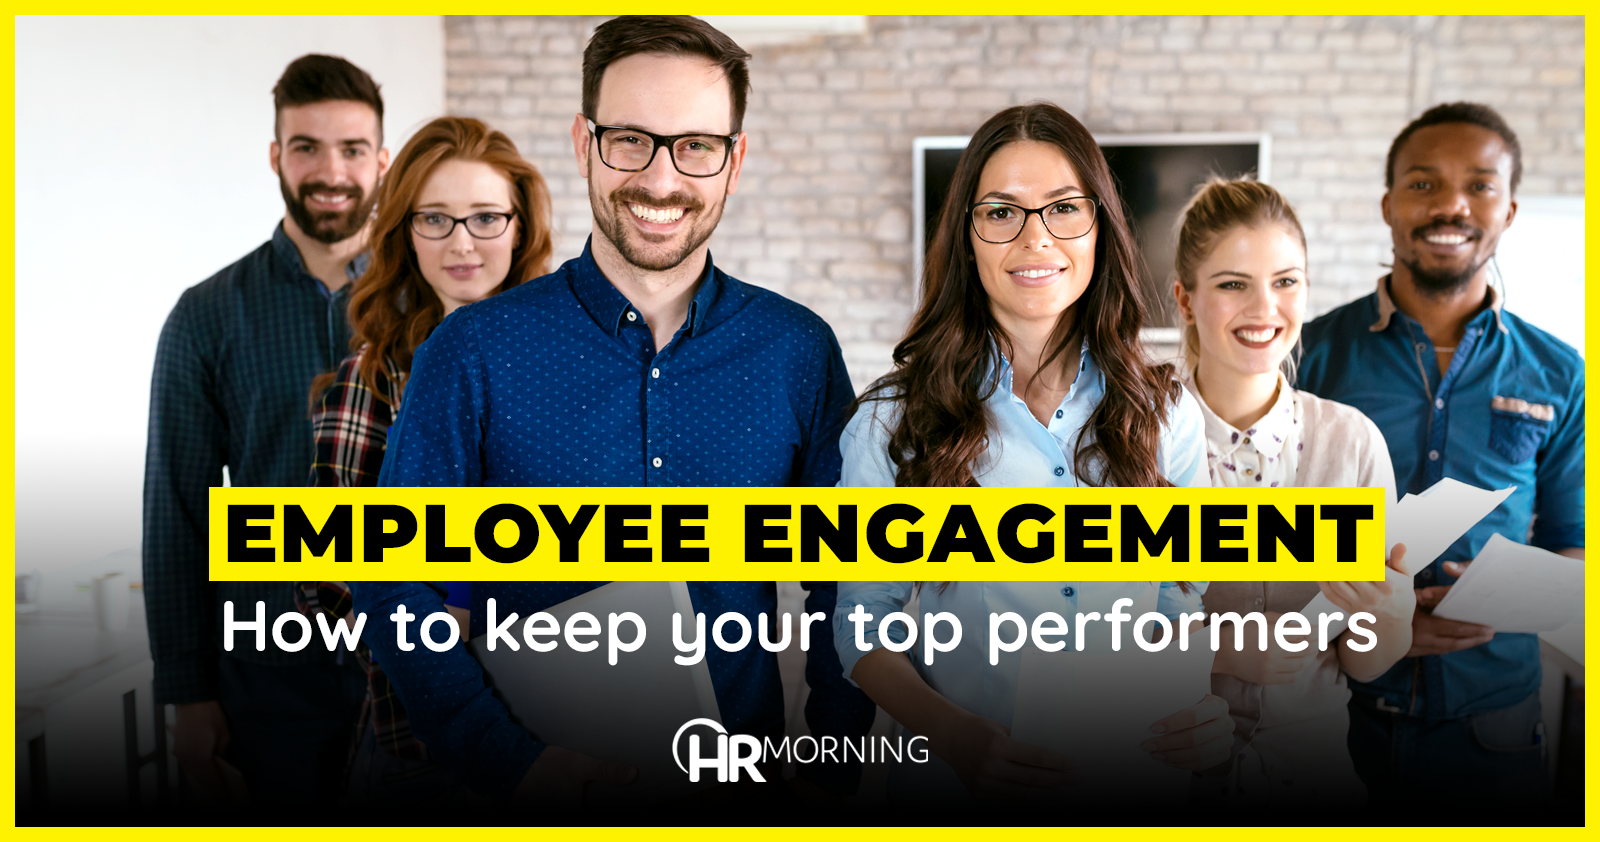 Employee engagement: How to keep your top performers